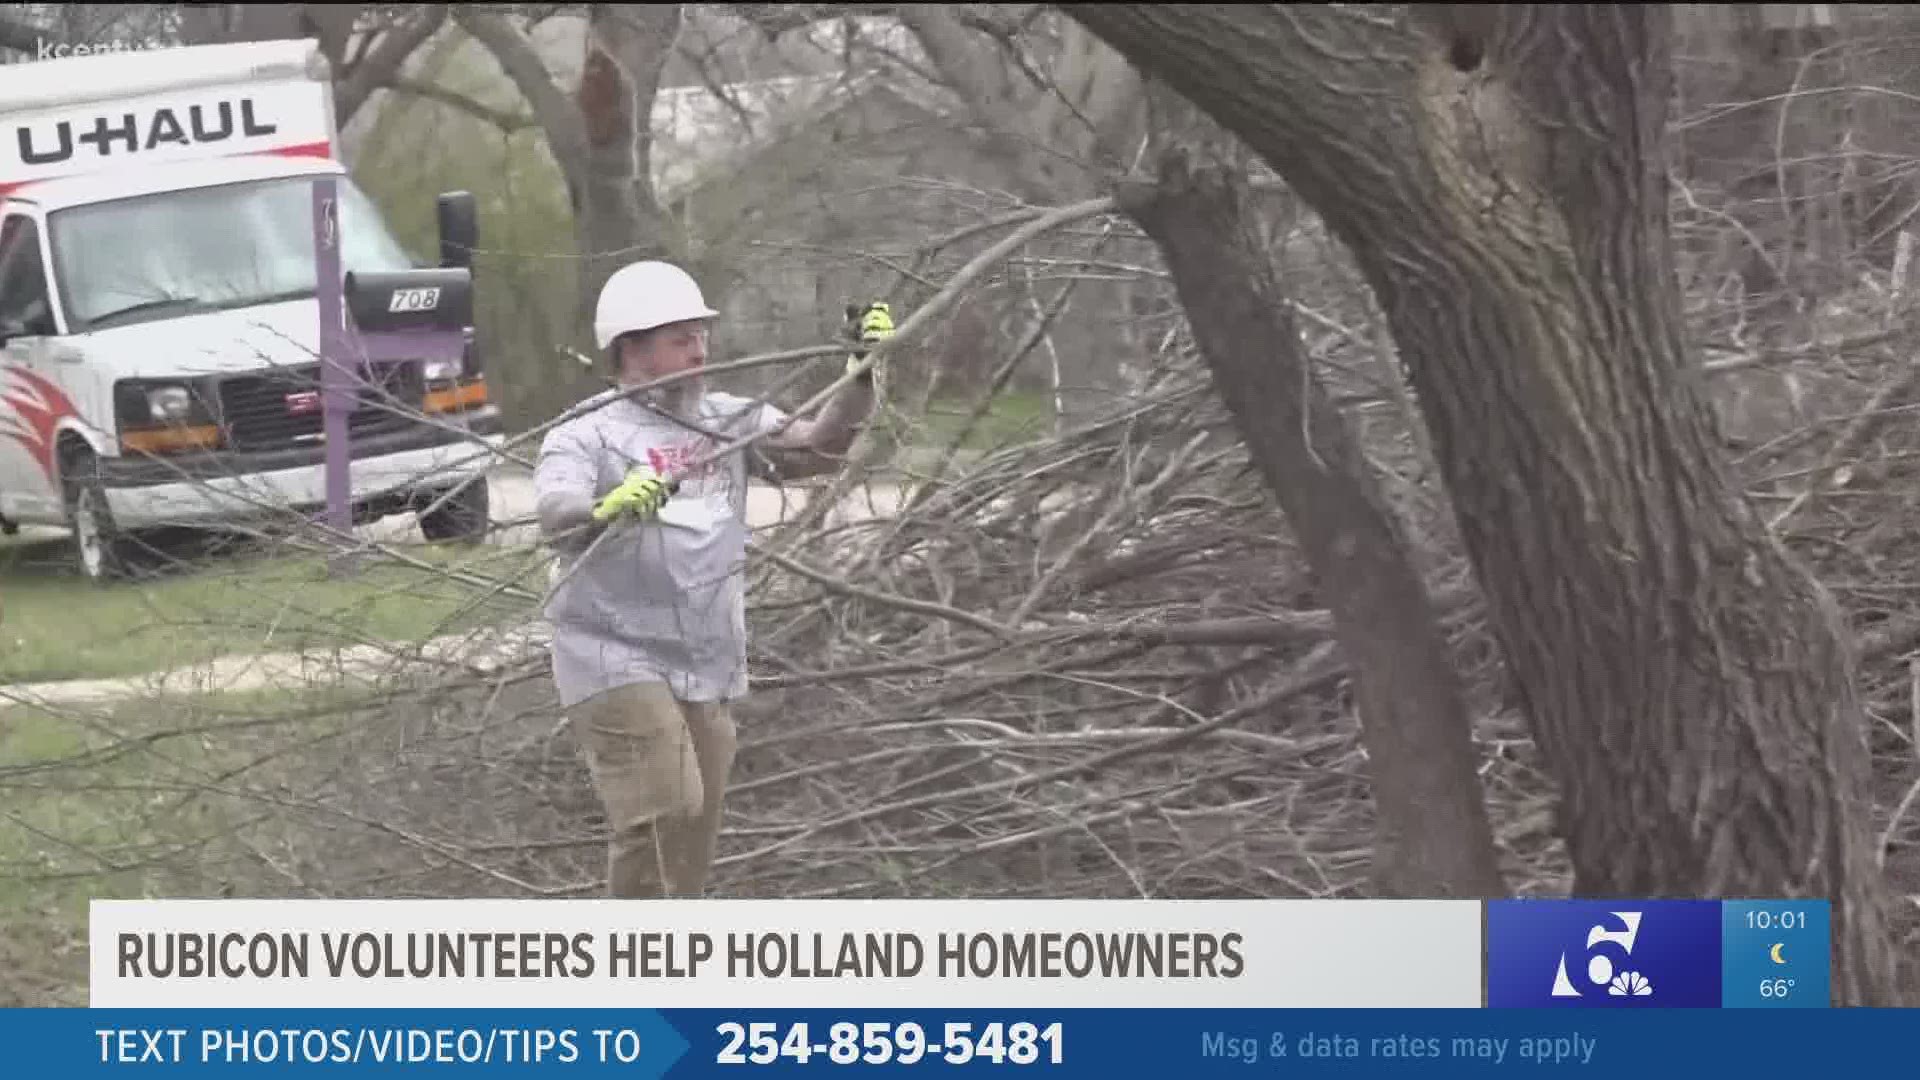 Long limbs hanging off trees were still posing a threat weeks after the historic winter storm, and one non-profit stepped up to help Holland residents.